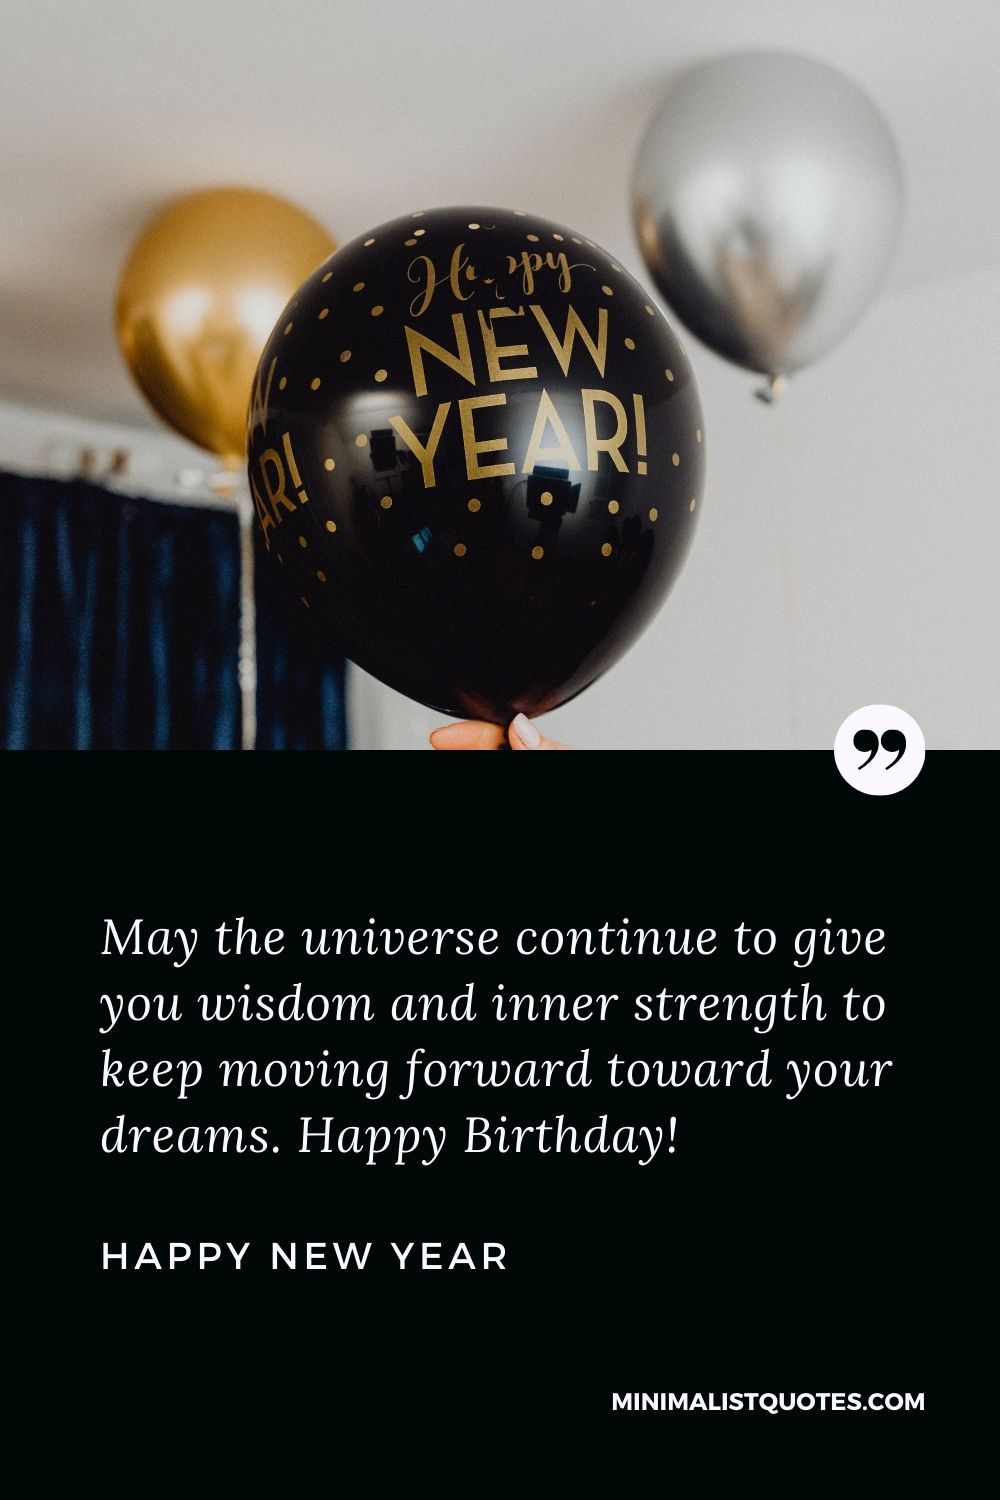 New Year Wish & Message with HD Image: May the universe continue to give you wisdom and inner strength to keep moving forward toward your dreams. Happy New Year!